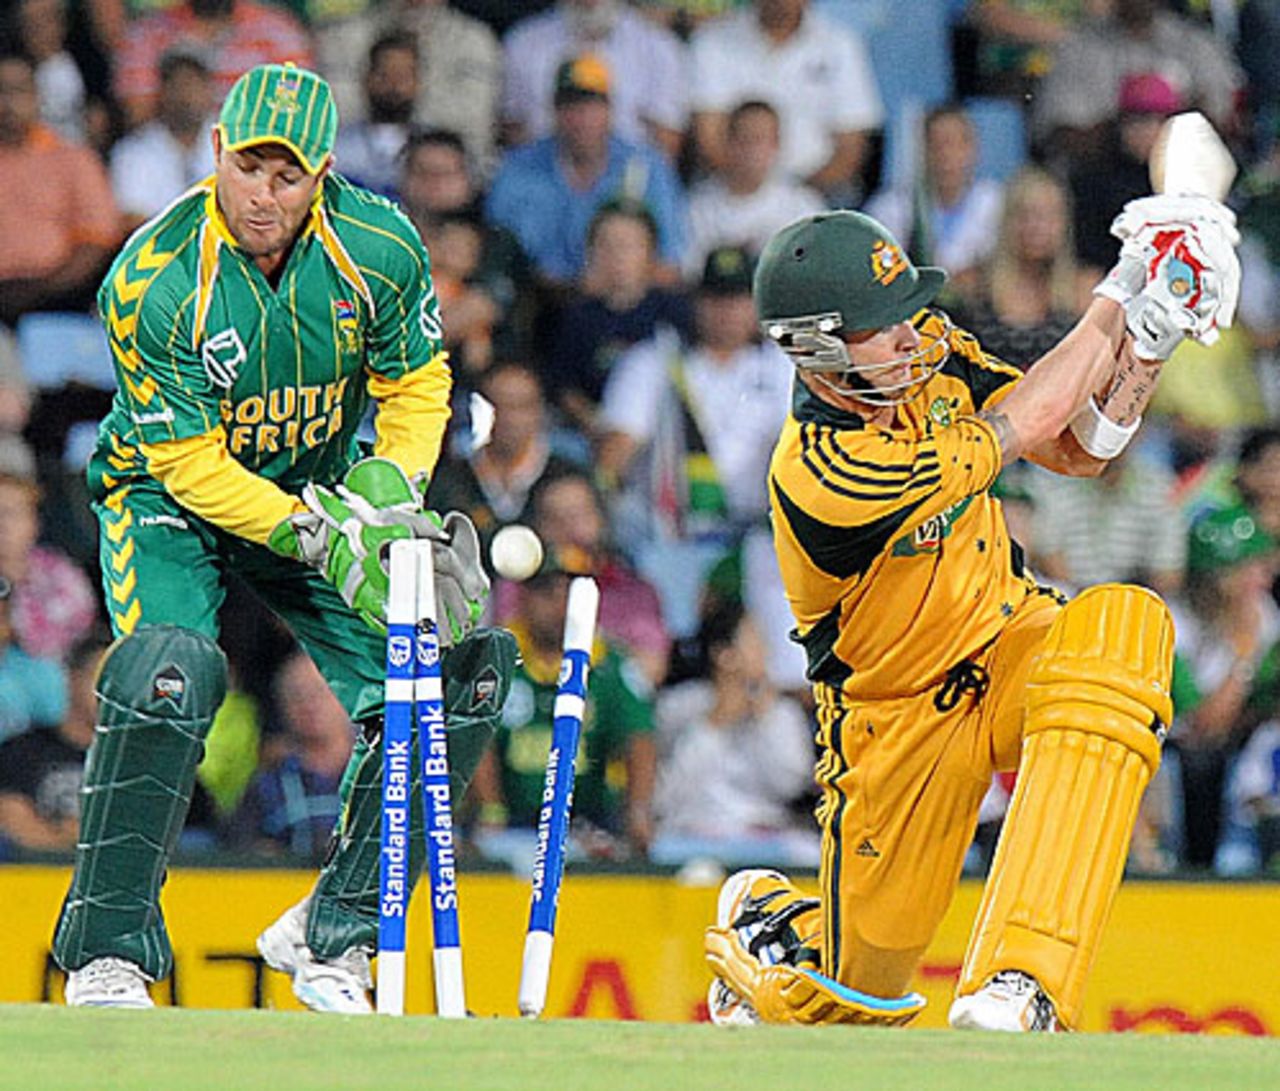 Michael Clarke sweeps and his leg stump is knocked out cold by Johan Botha, South Africa v Australia, 2nd Twenty20, Centurion, March 29, 2009